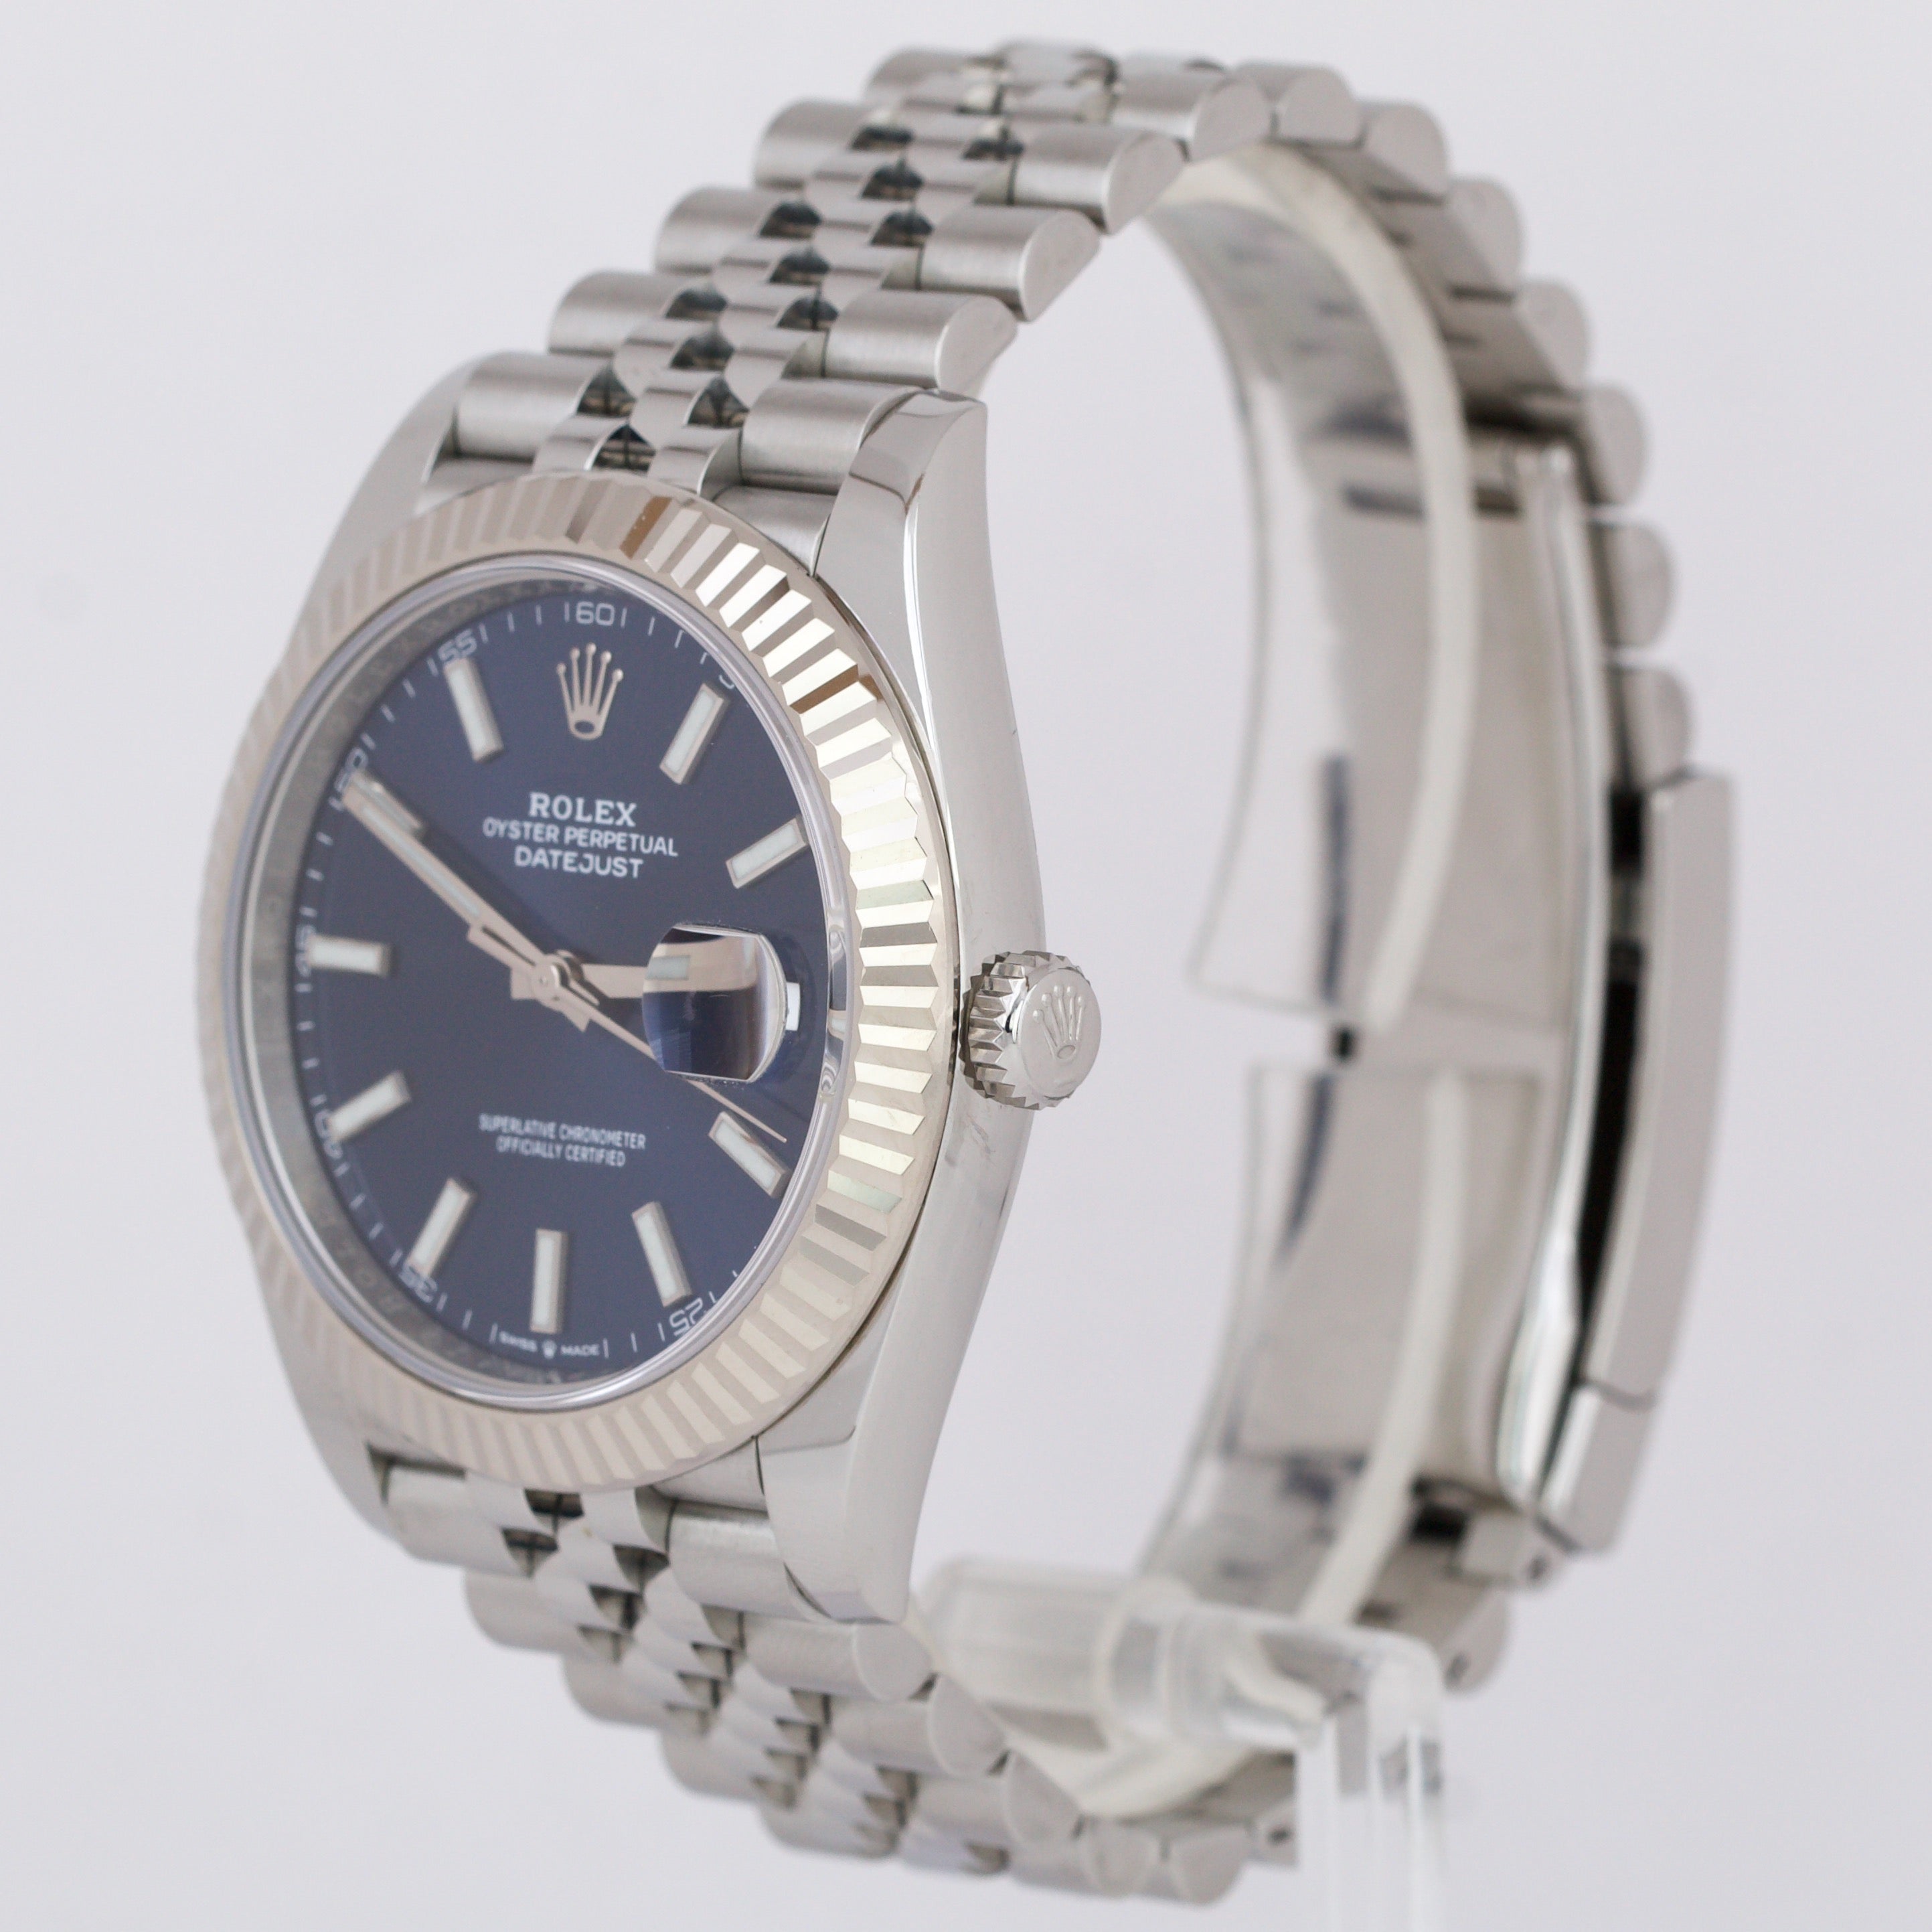 Rolex DateJust 41 Blue Stainless Steel Jubilee 41mm Watch 126334 BOX & PAPERS